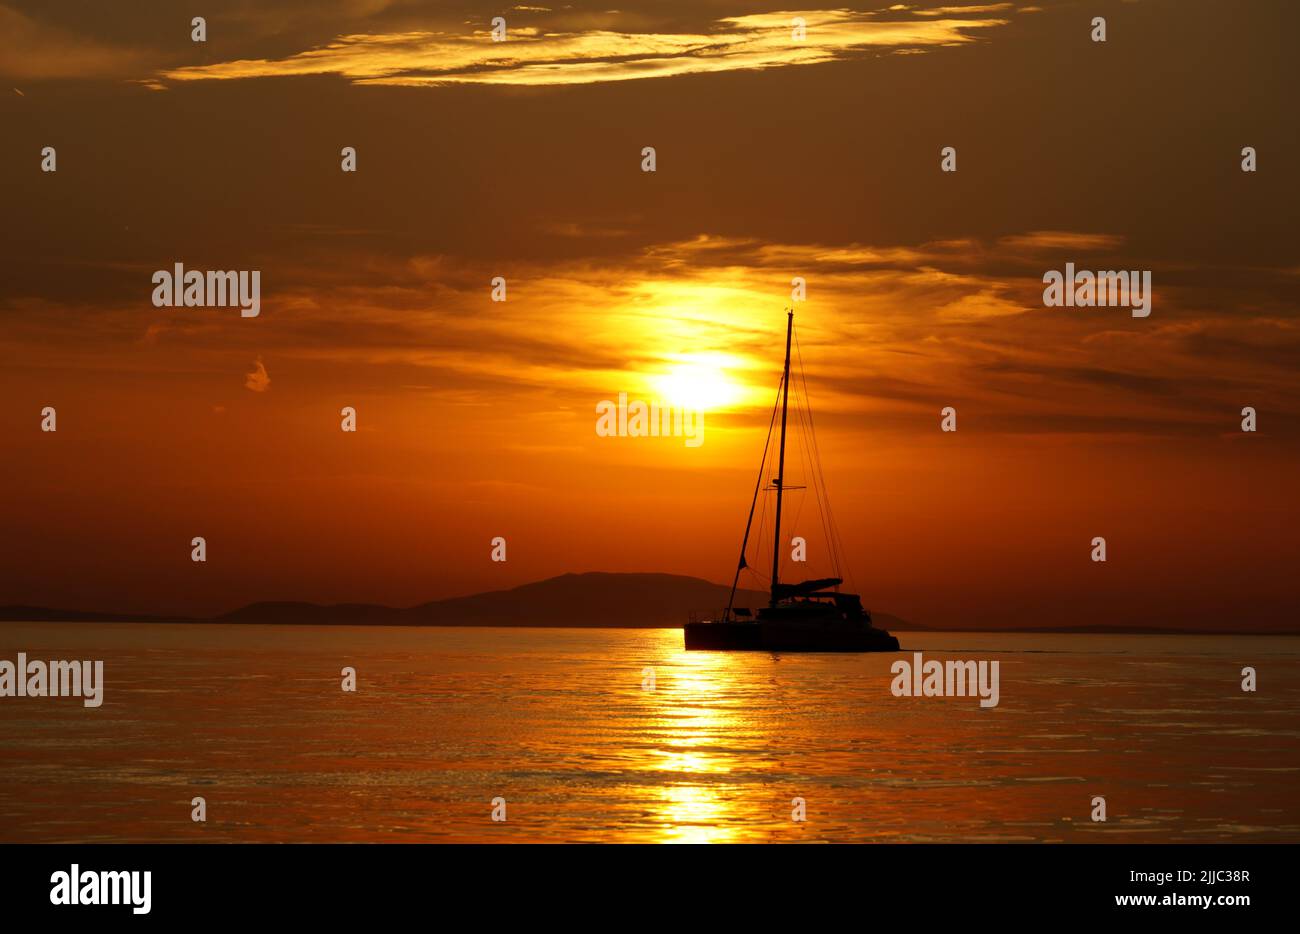 Black silhouette of yacht during summertime golden hour at scenic intensive color seascape Stock Photo